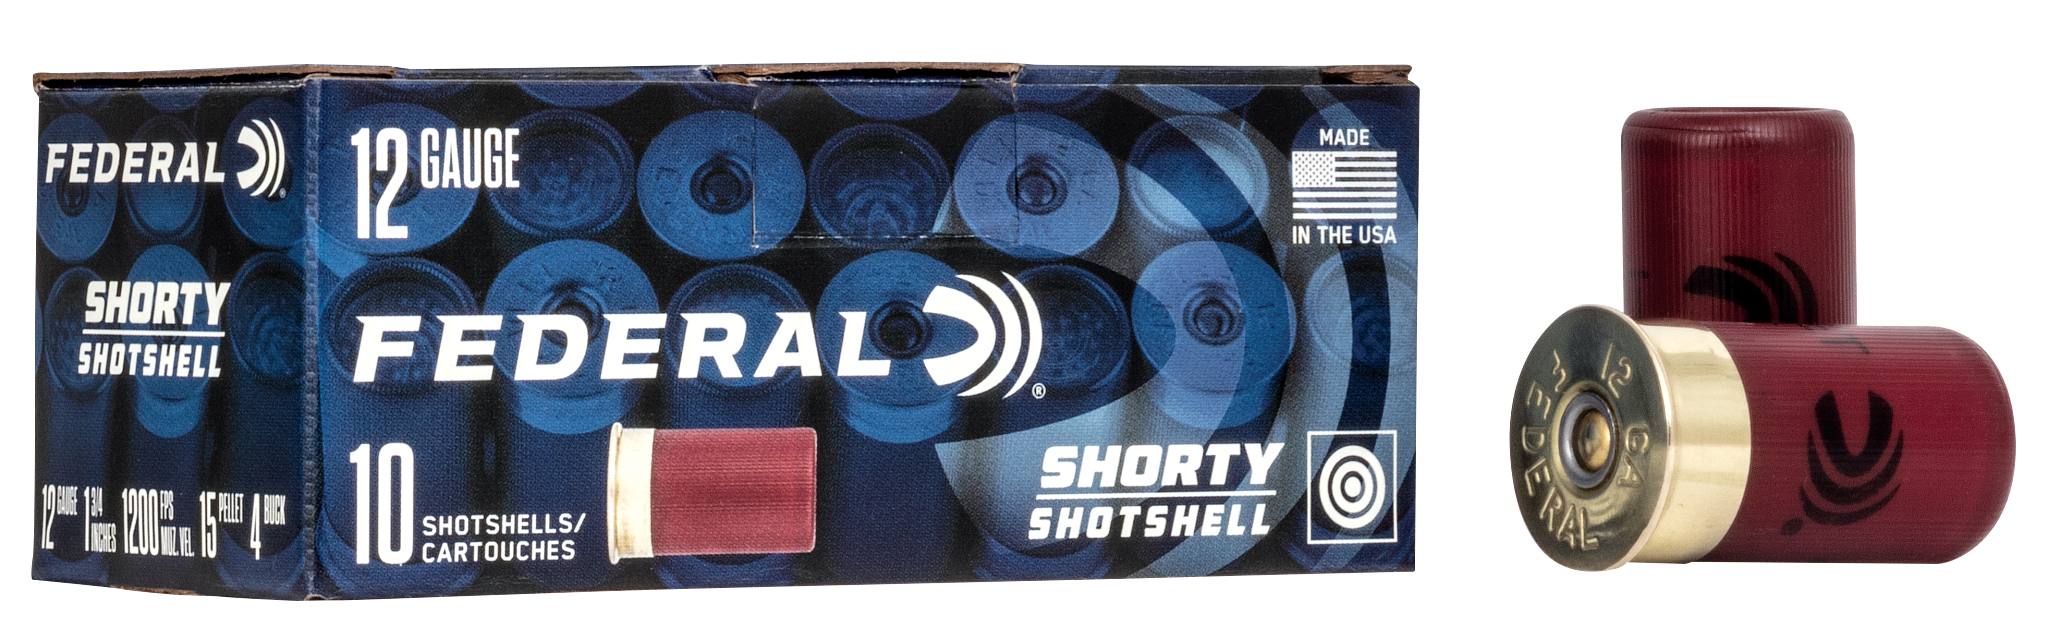 Shopping for the Shorty Shotshells - Learn more about the latest Shorty Sho...